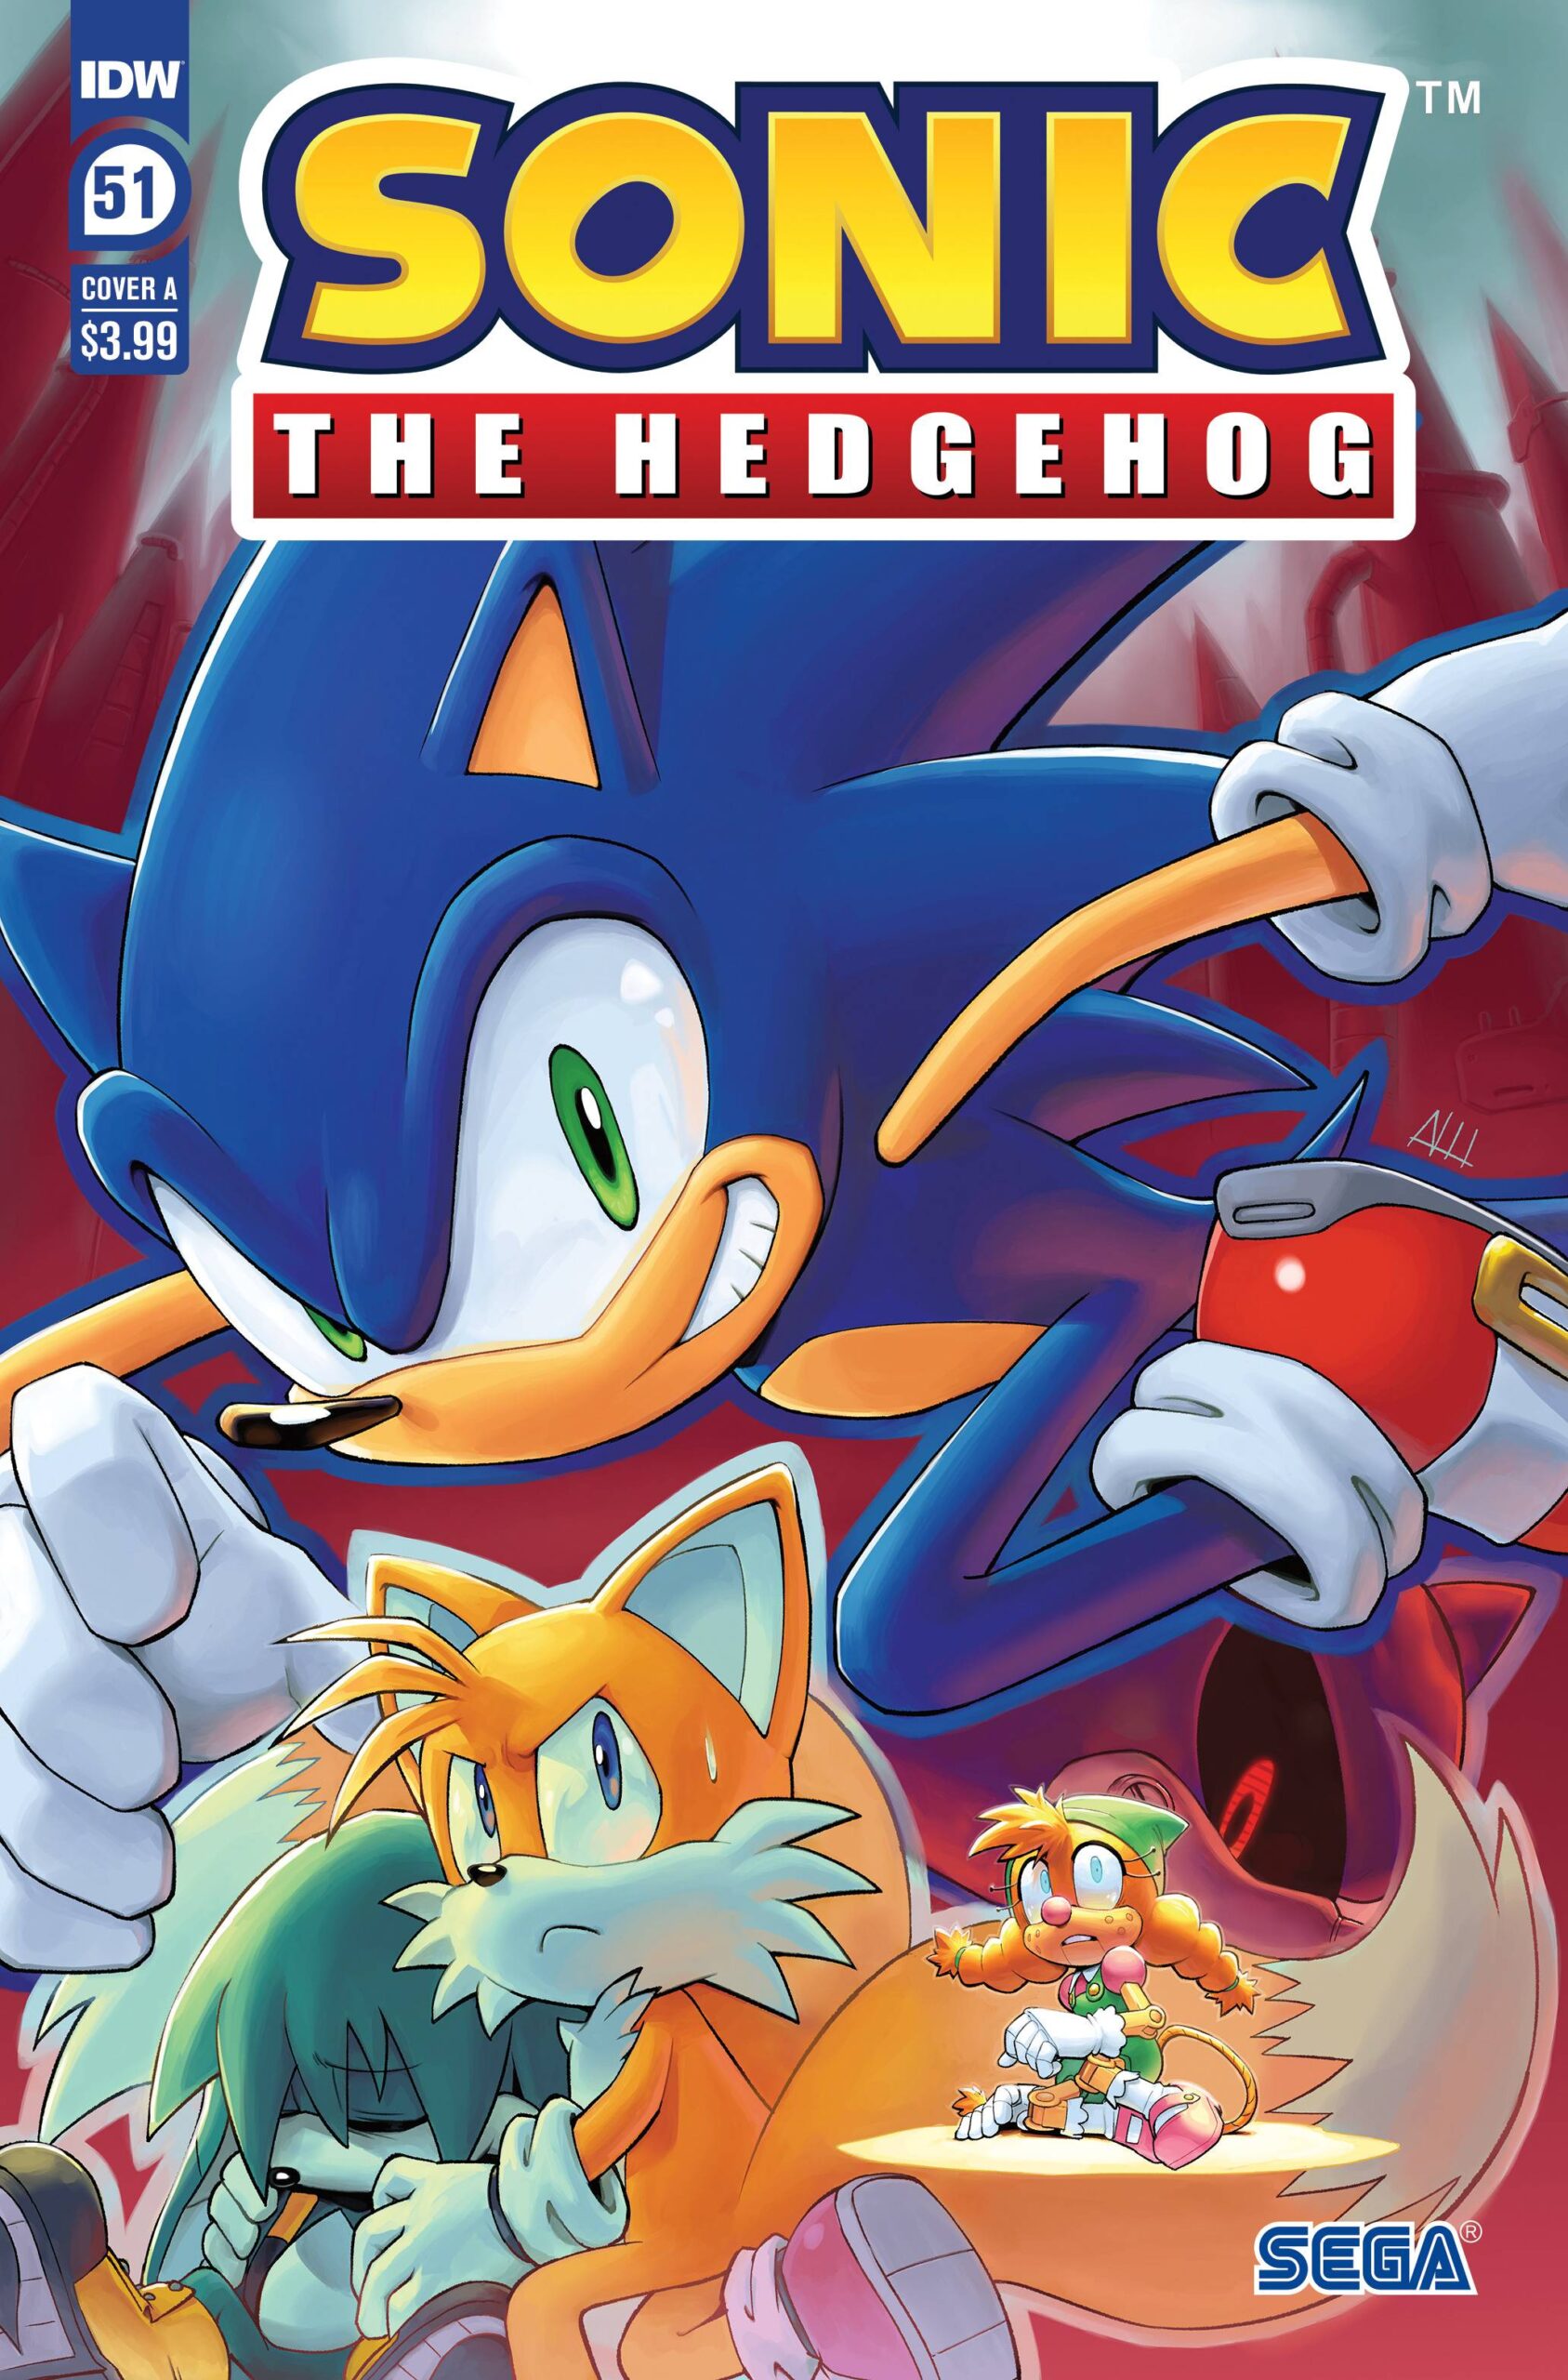 Sonic The Hedgehog #51 Cover A